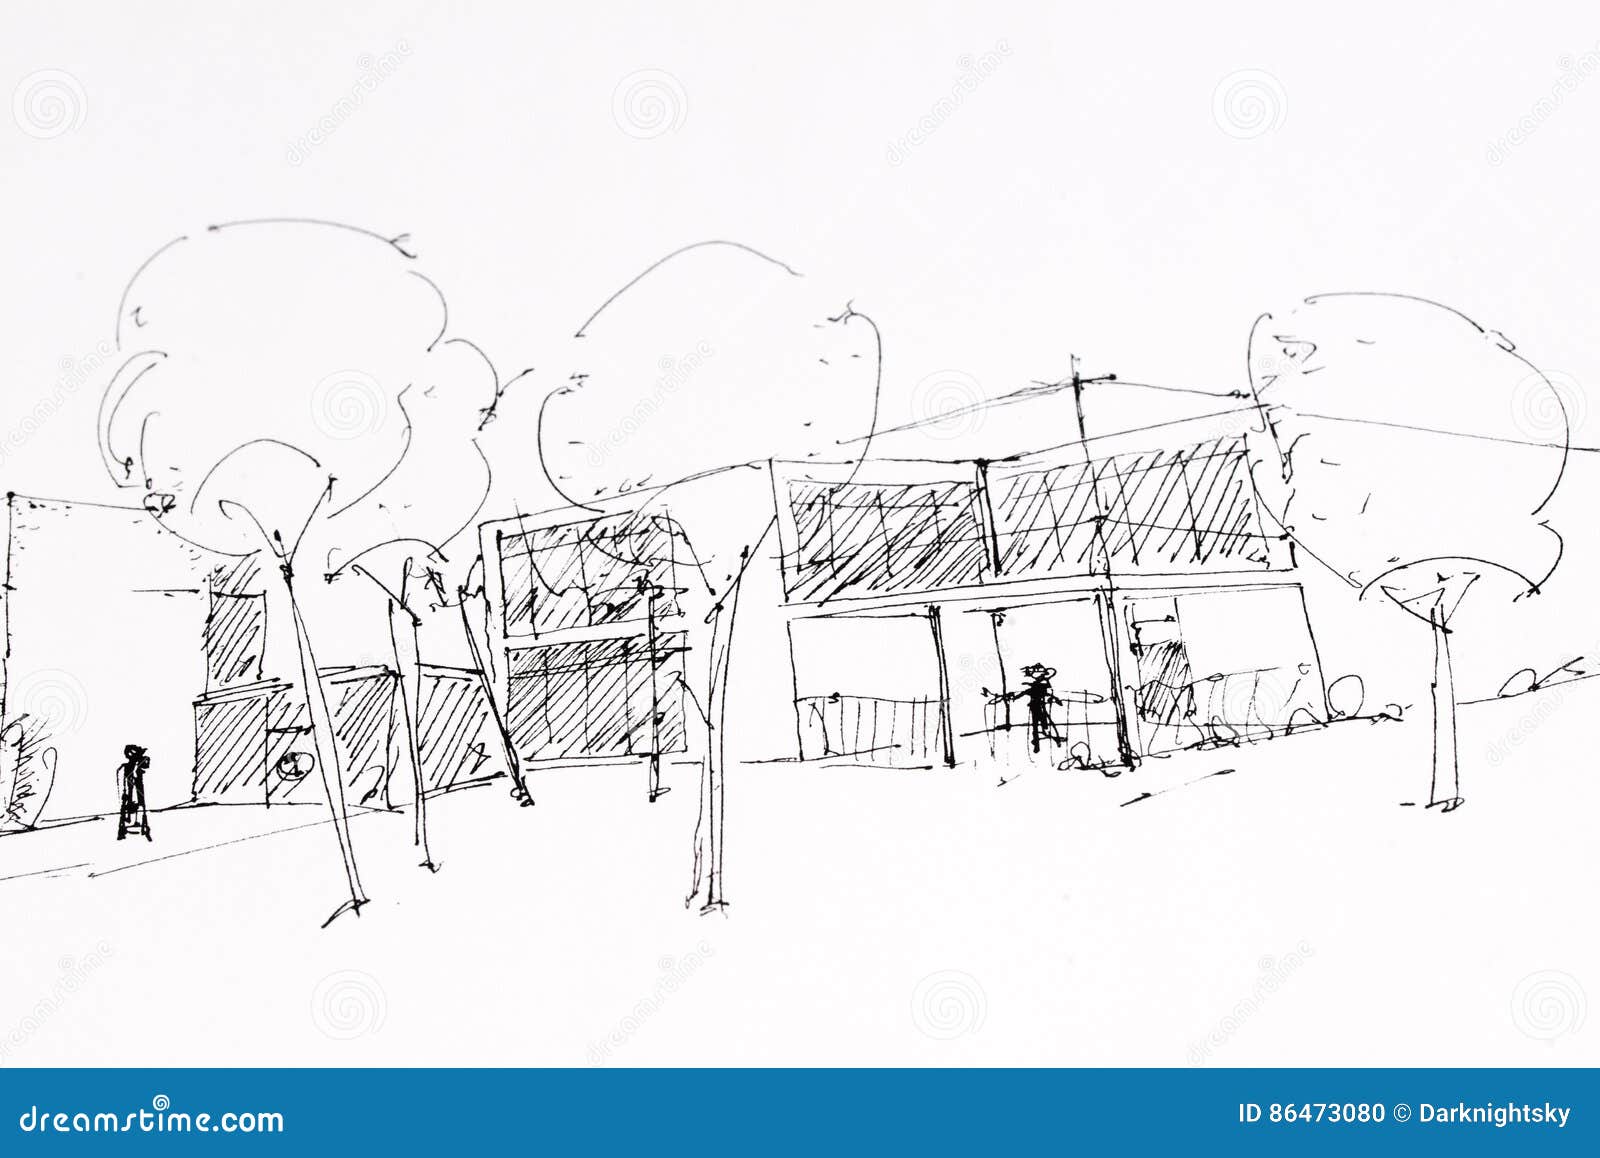 Modern house concept - pencil drawing on Behance